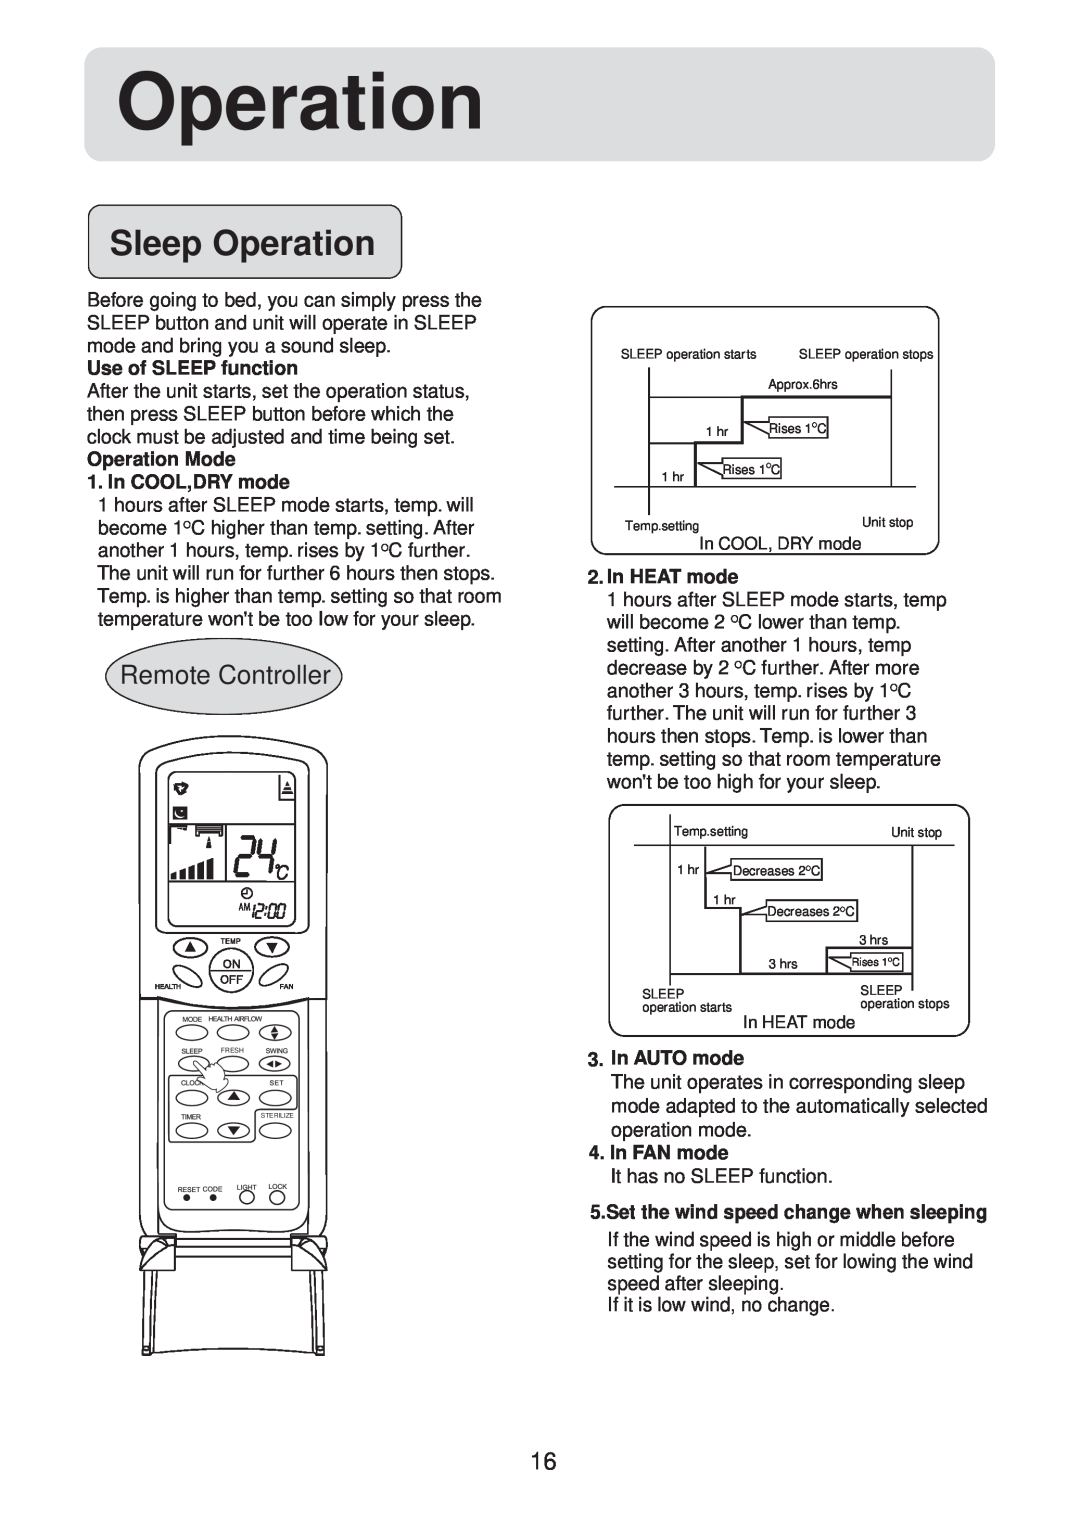 Haier HSU-12HV03/R2(SDB) Sleep Operation, Remote Controller, Use of SLEEP function, Operation Mode 1. In COOL,DRY mode 